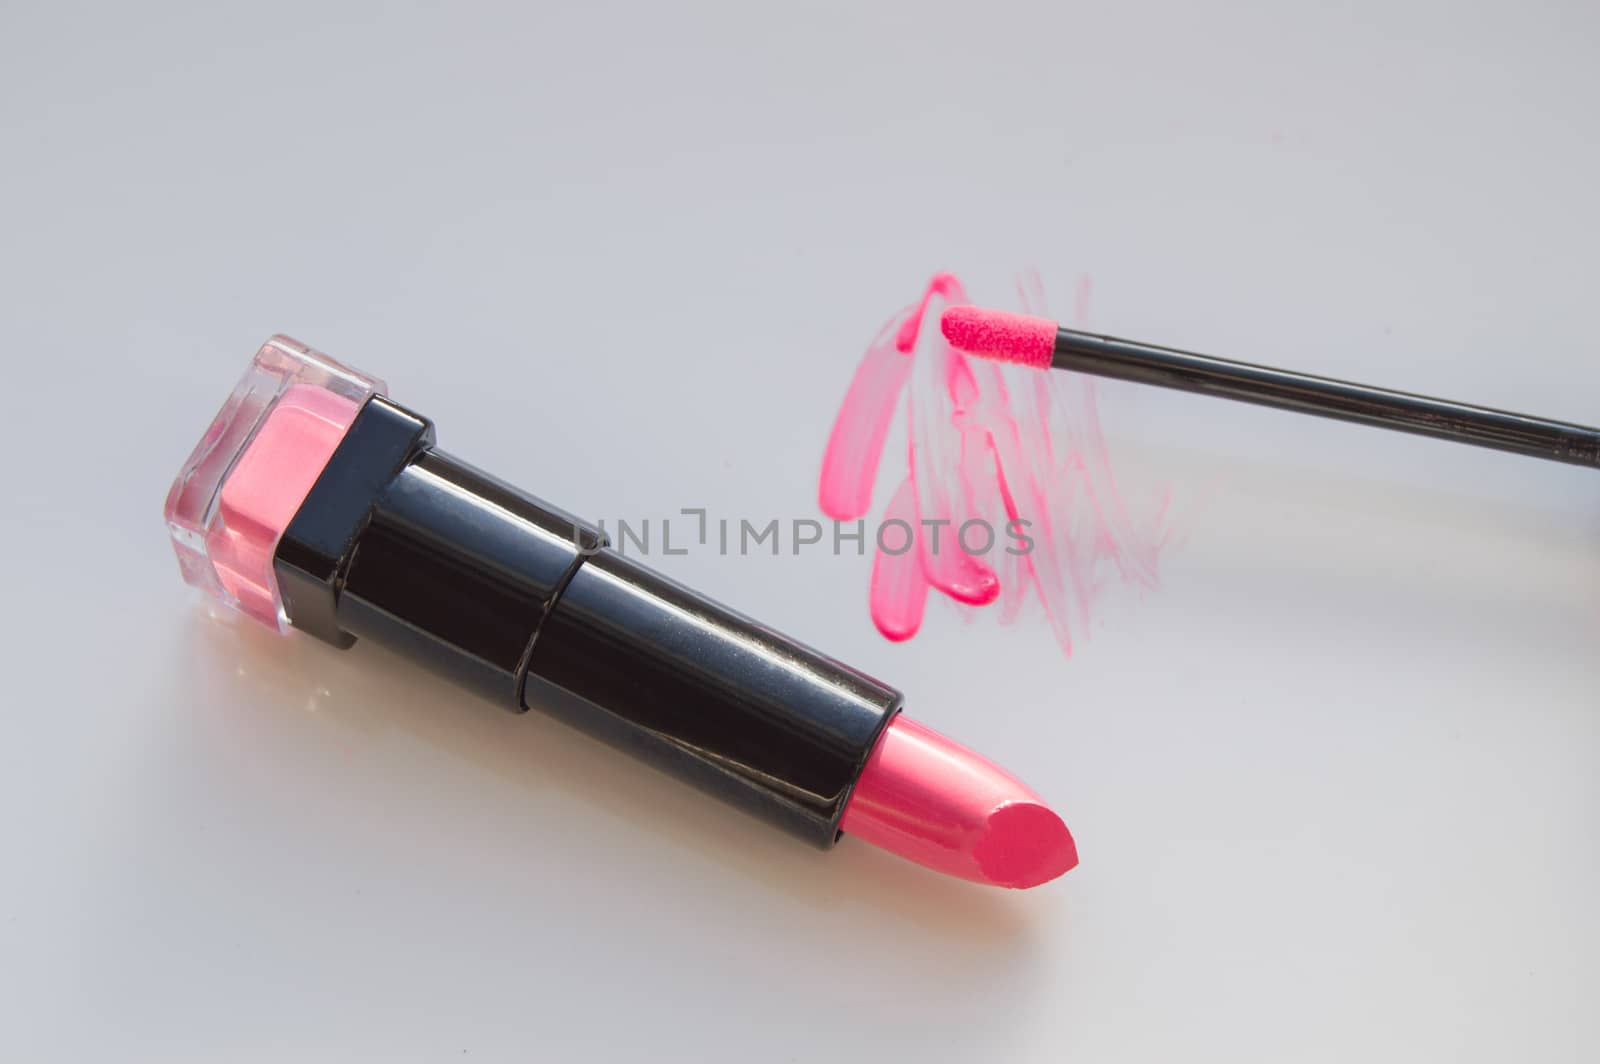 beautiful pink lip gloss smear with brush and a tube of lipstick, white background by claire_lucia